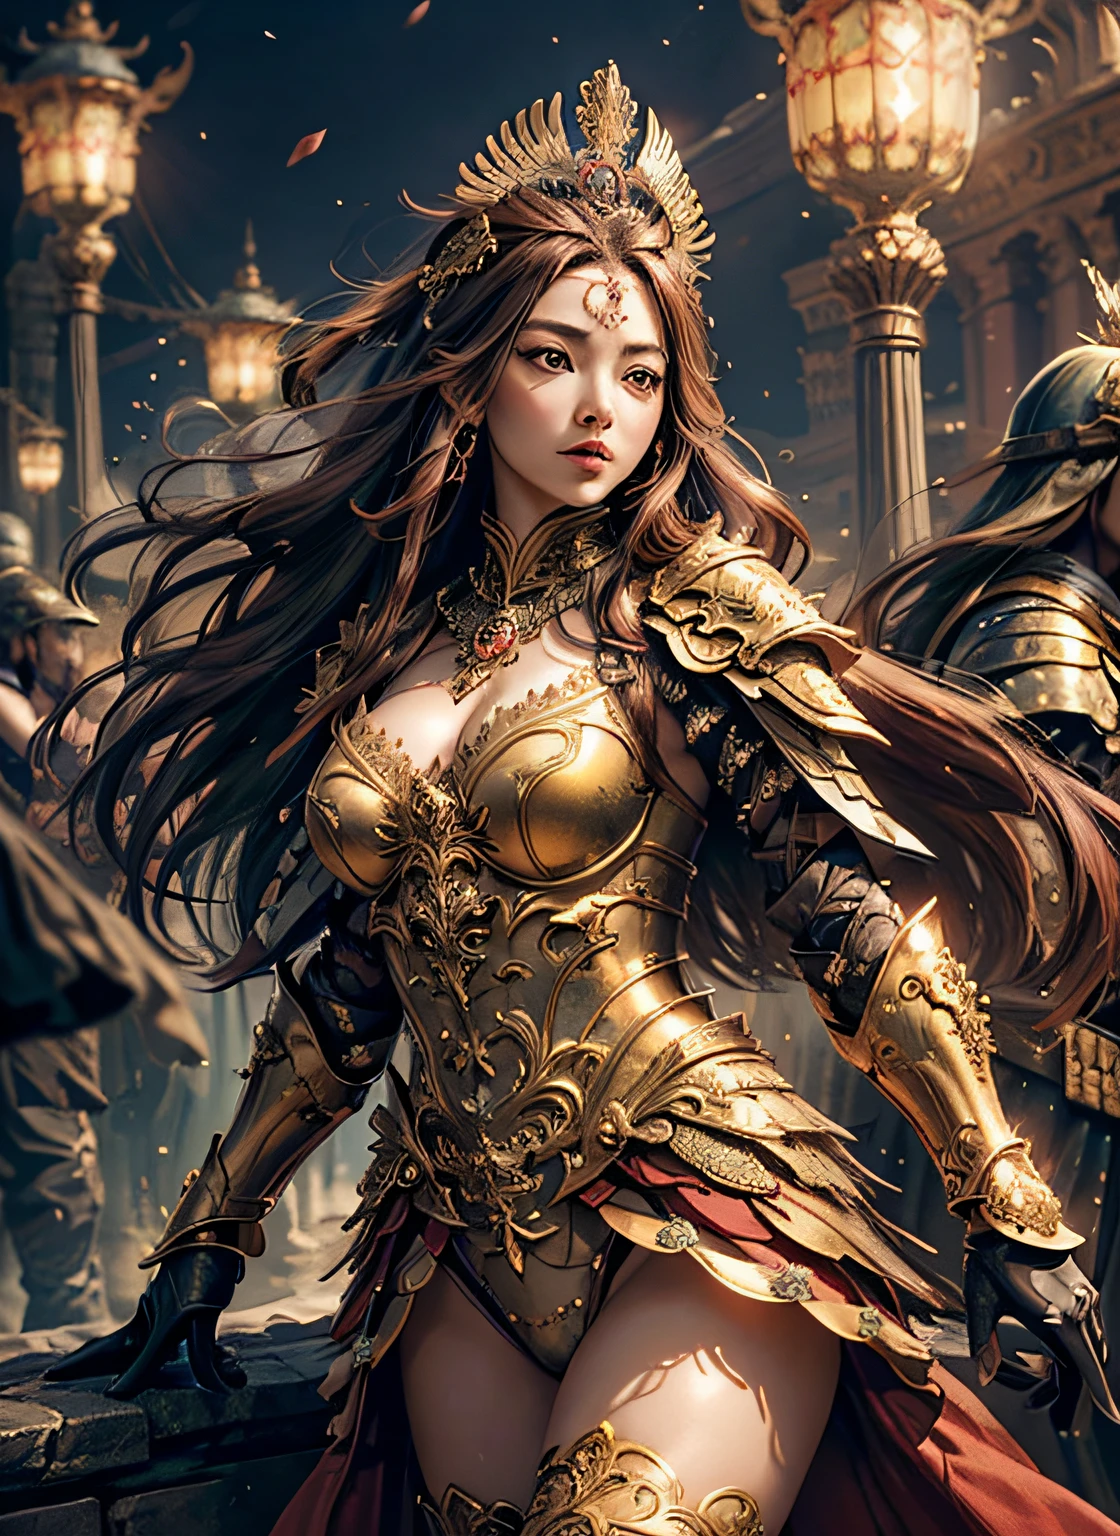 (surrealistic), (hight resolution), (8K), (ighly detailed),  (beatiful detailed eyes), (top-quality), (Ultra-detail)、intricate detailes、
1girl in、fullbody image、(Goddess of battle、A beautiful woman full of power、hali々and has)、perfectly proportions、big eye、pretty eyes、Big Tits、big breasts thin waist、navel、Crotch gap、thighs thighs thighs thighs、beautiful countenance、A detailed face、Perfect figure:1.4、(shinny skin), (cleavage of the breast)、length hair、the wind、RIDE GOOD、 Long ugly hair, (Brown hair:１.3)、Look at viewers, Wearing intricate red super armor、Clear Focus:1.2、Lightning Effect、Ultra-detailed large crown adorned with jewels:１.2)、huge tit、oppai、Translucent sexy underwear、Jewels with intricate details、(Ultra-detailed yellow armor adorned with jewels:1.３)、diffuse lighting、Valhalla Valkyrie、(Realistic lighting)、Light your face、Lights from the front、Shine a light on your face、